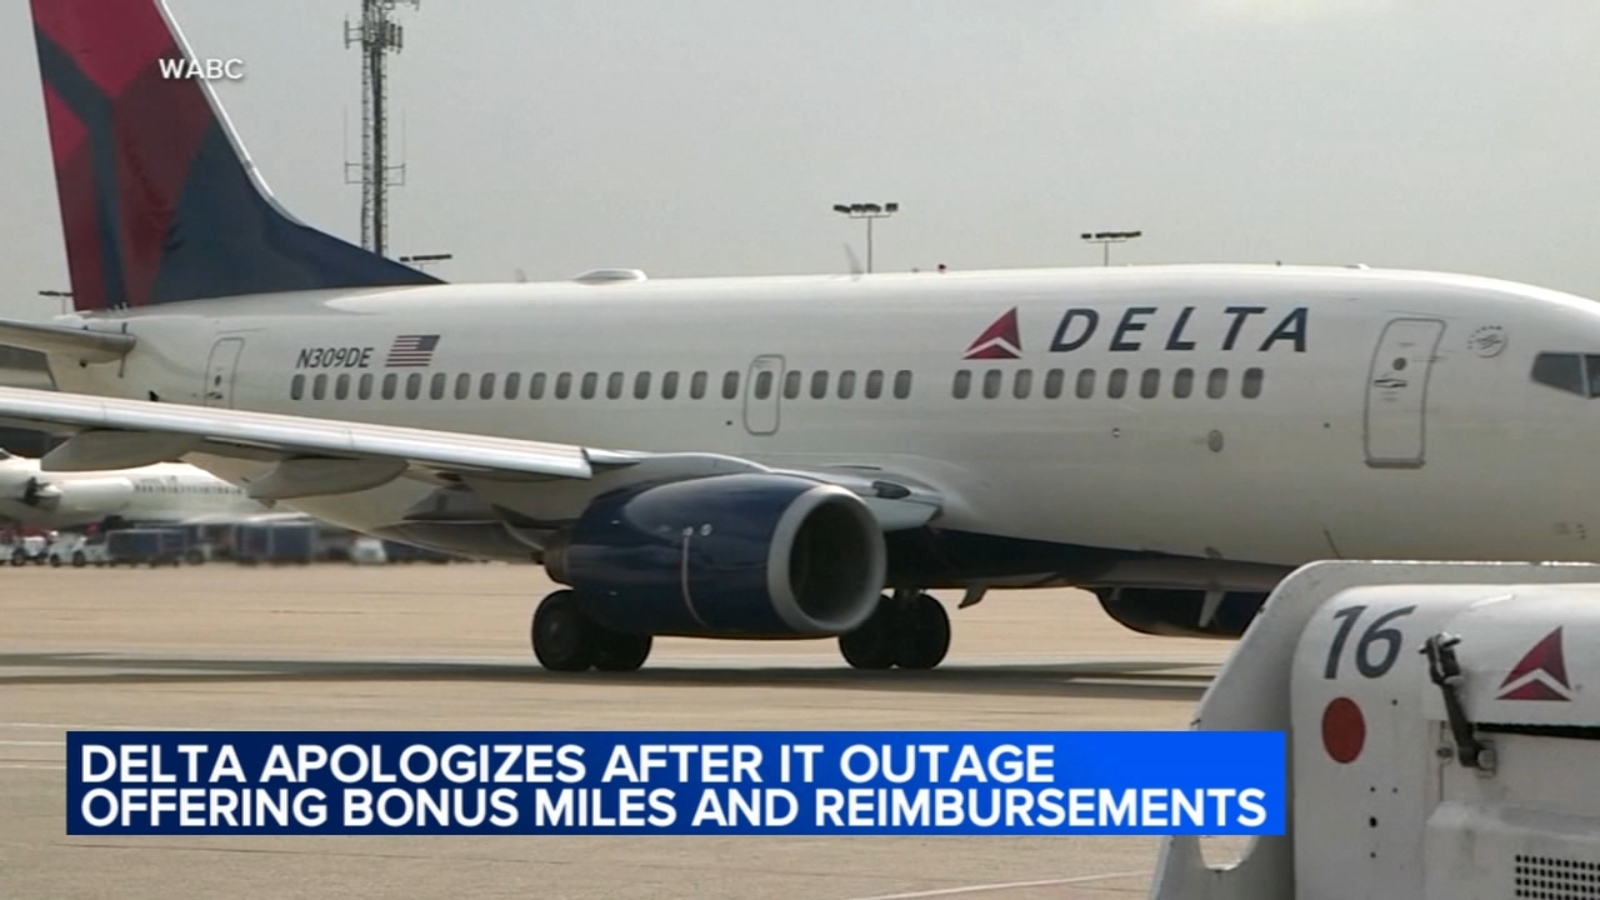 CrowdStrike outage: Delta Air Lines expects outage cancellations to end soon; reimbursing travelers for some expenses, CEO says [Video]